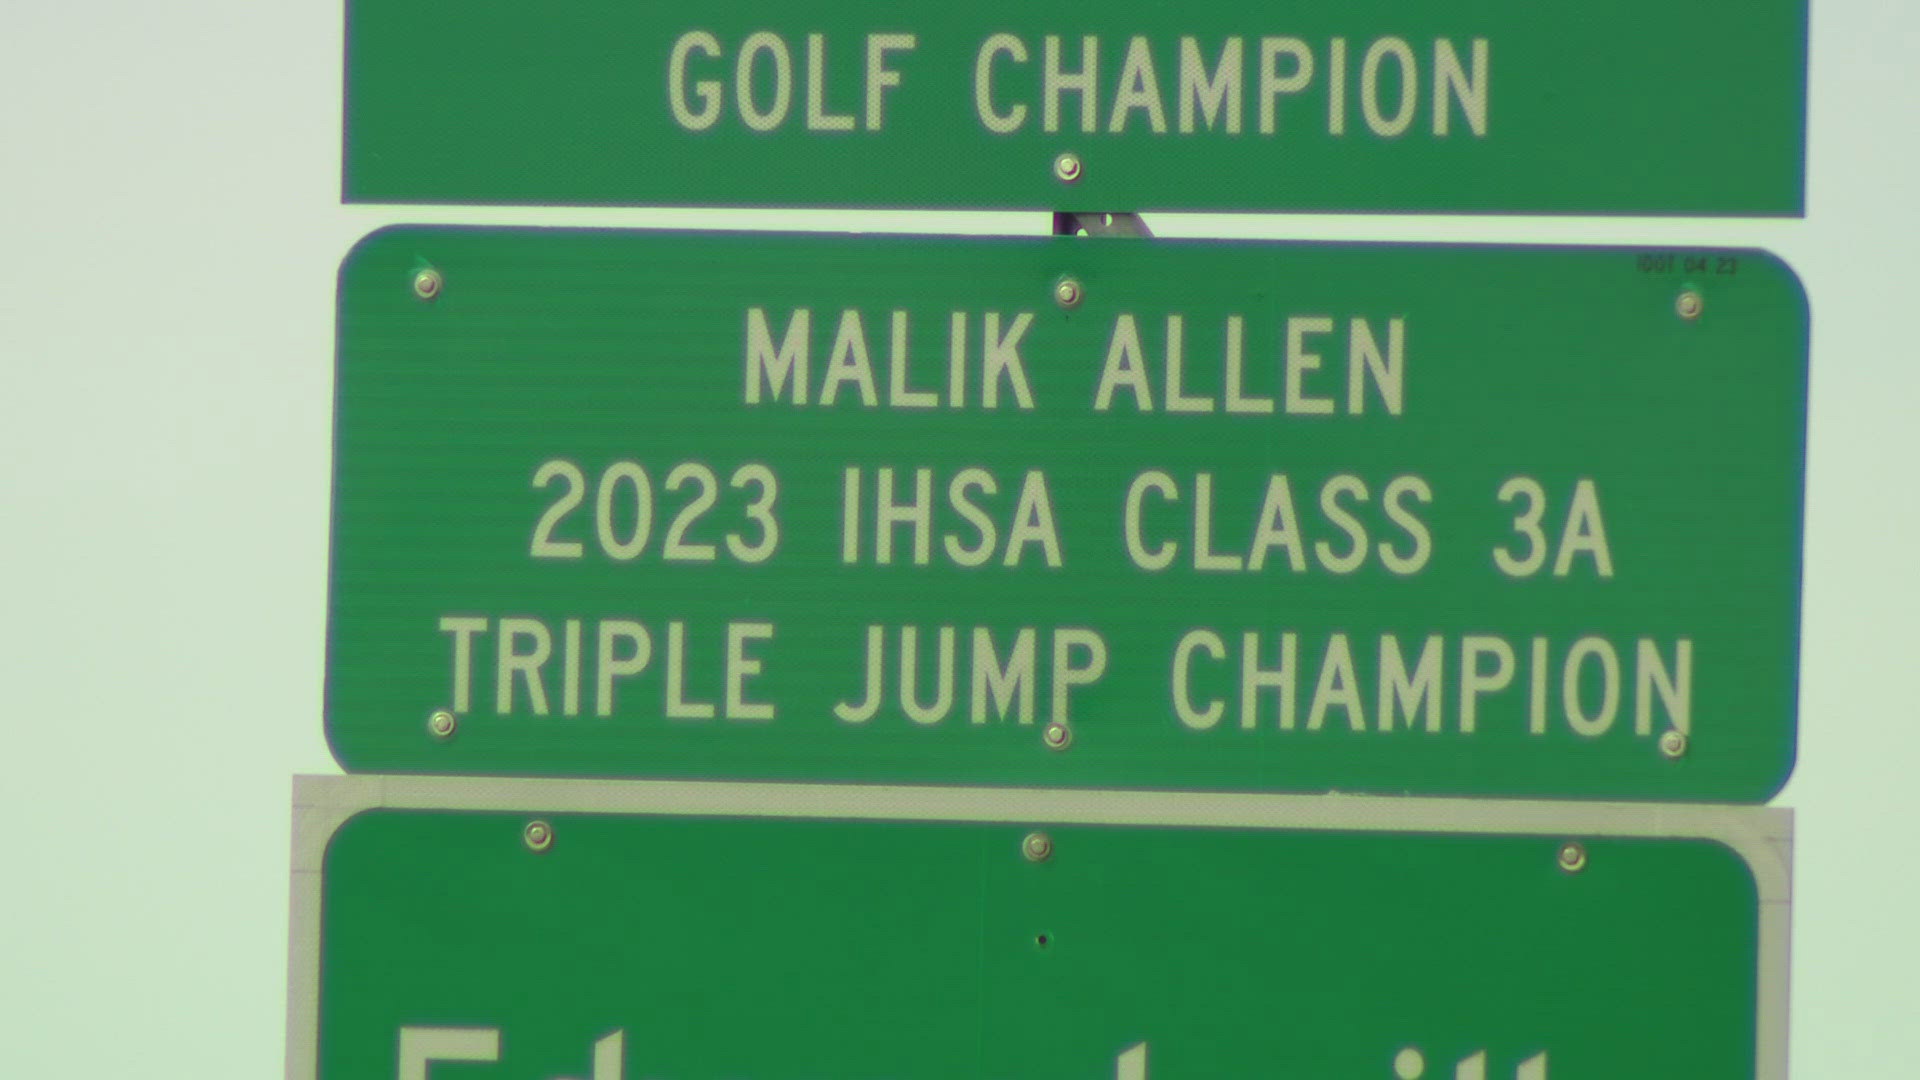 The multi-sport athlete will compete in college... but his dreams go further than that. In fact, Malik Allen has had dreams about becoming an Olympian someday